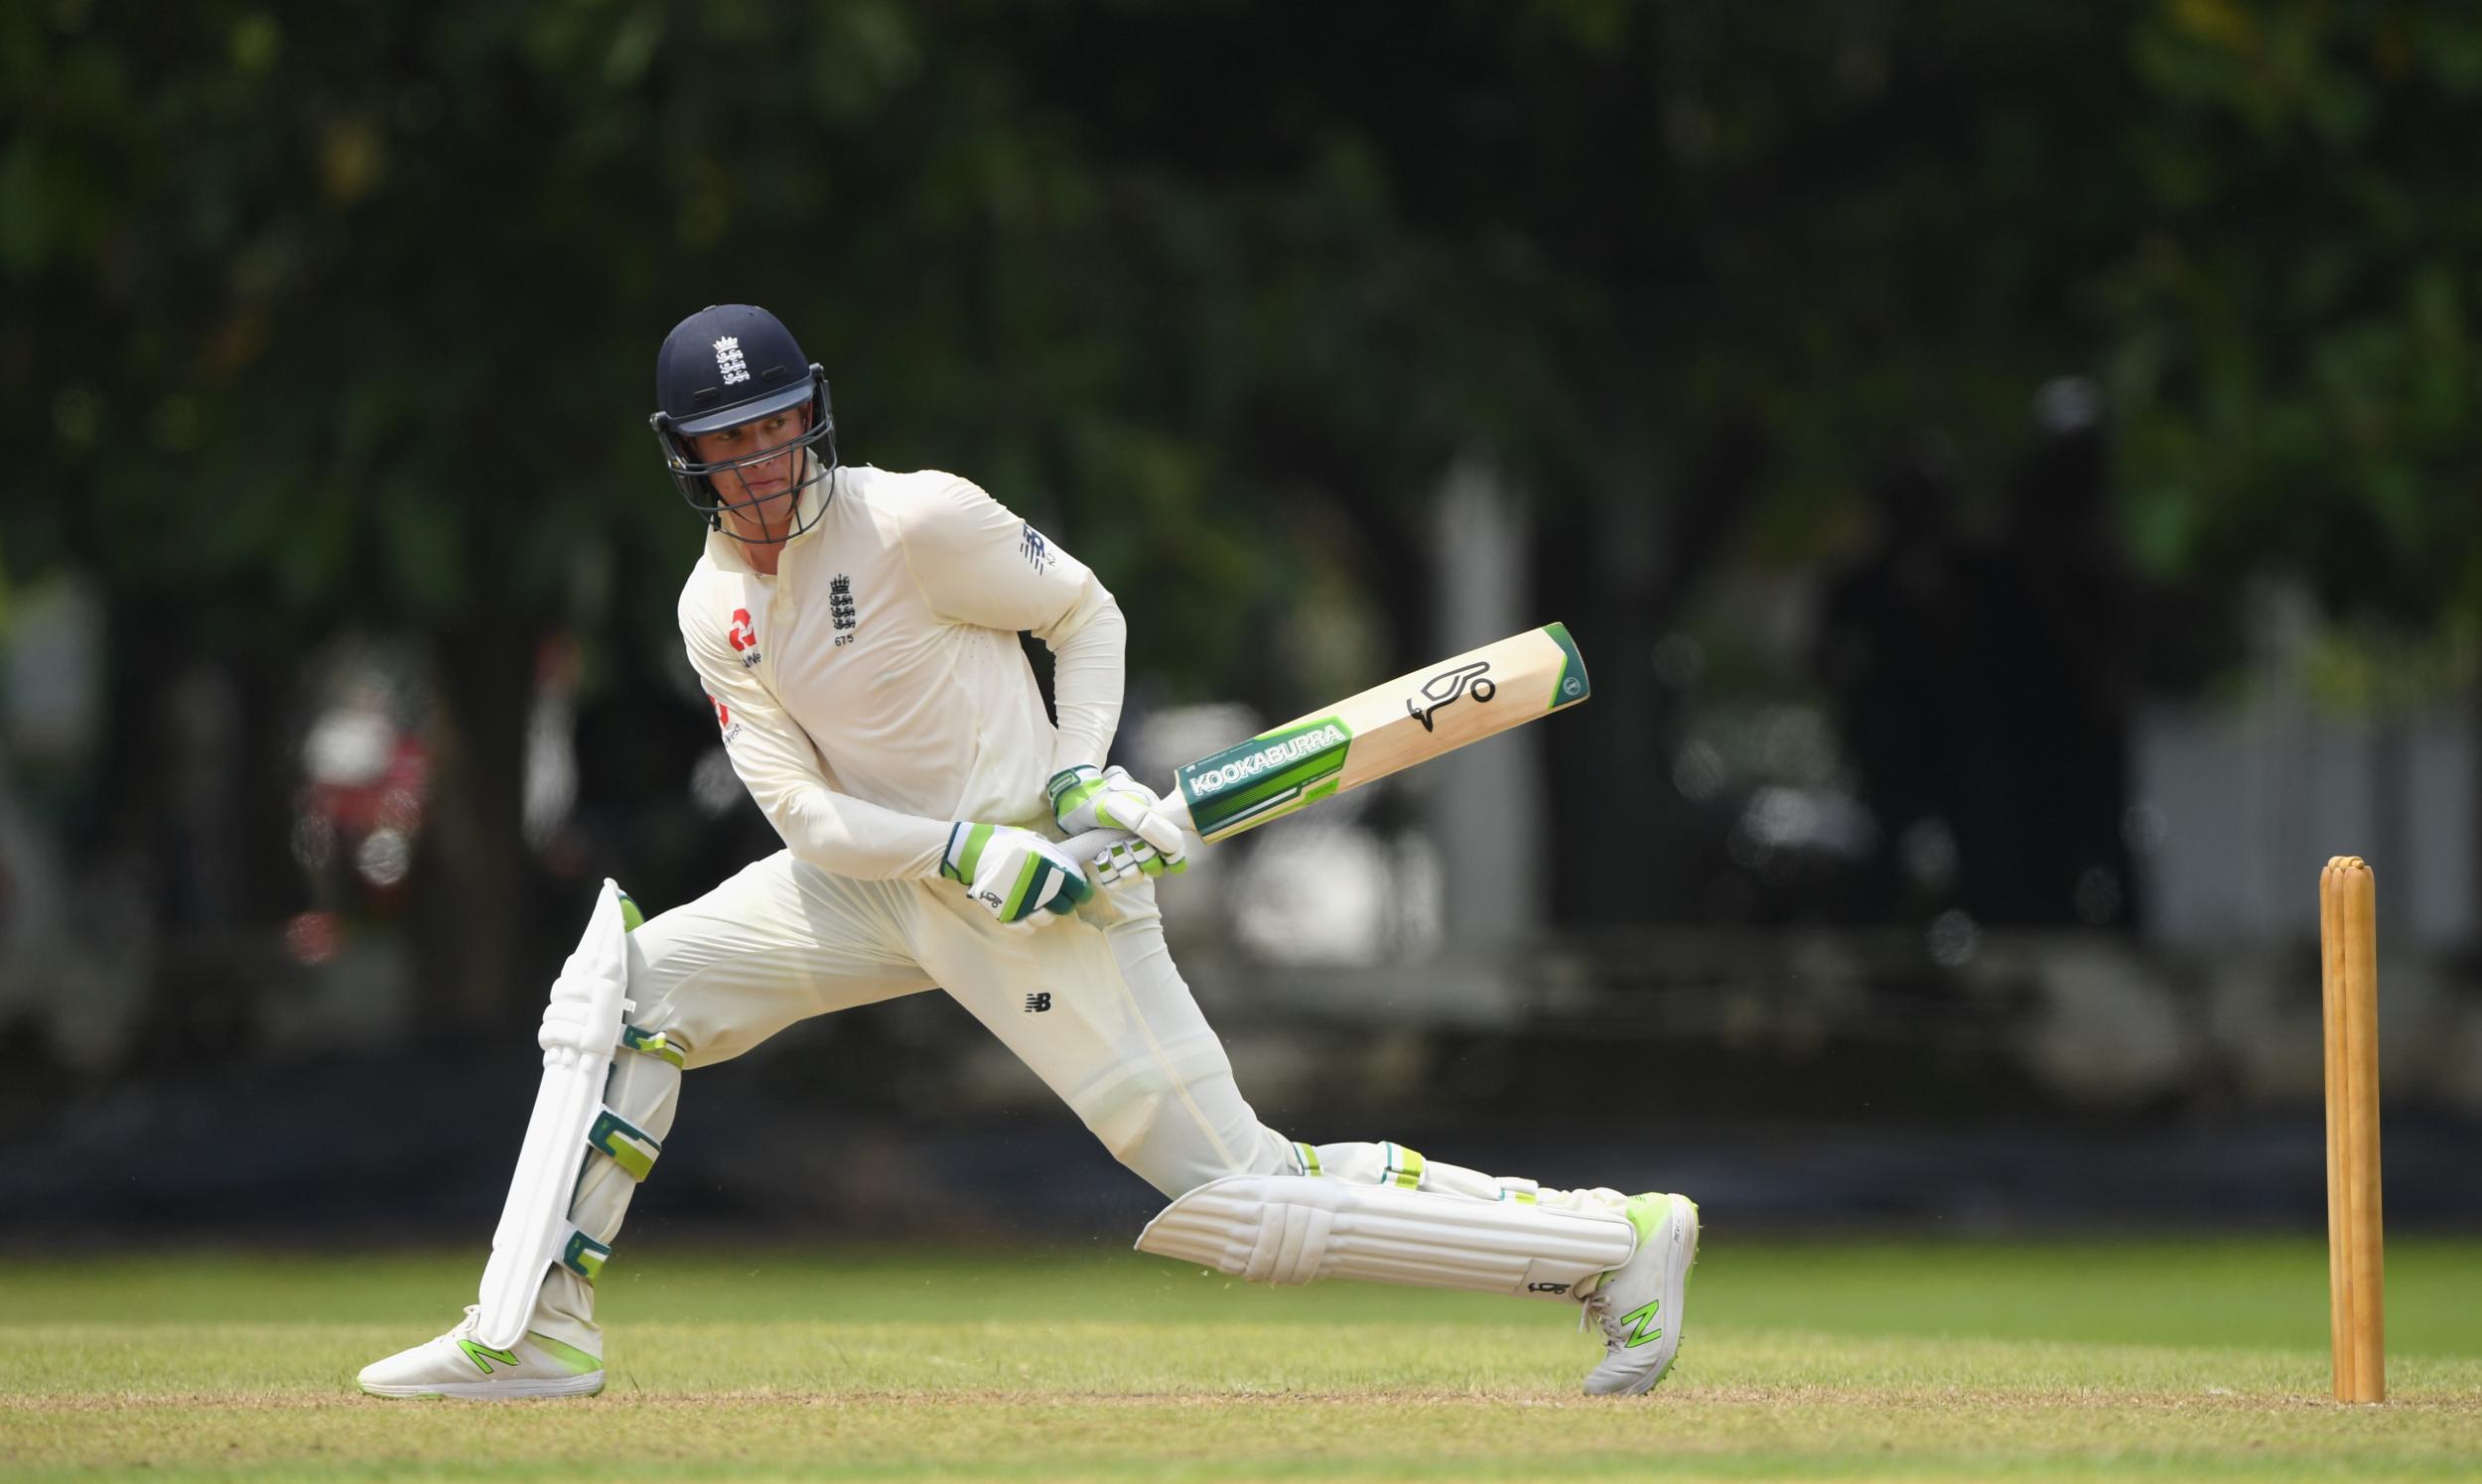 Keaton Jennings batted well on Friday in Colombo